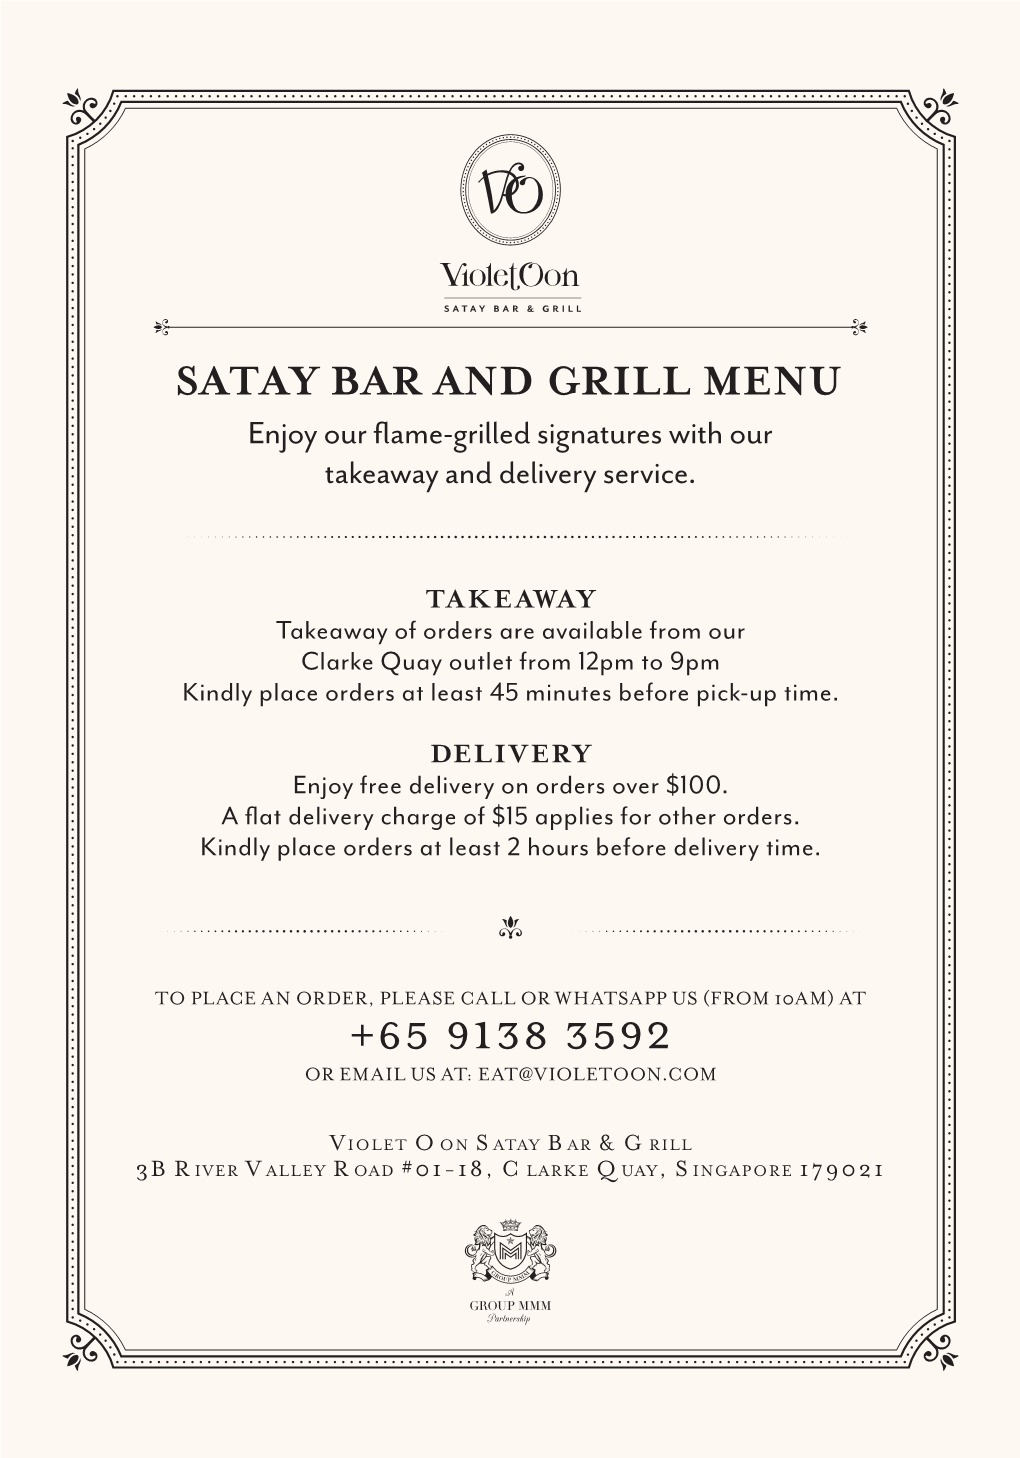 SATAY BAR and GRILL MENU Enjoy Our ﬂame-Grilled Signatures with Our Takeaway and Delivery Service